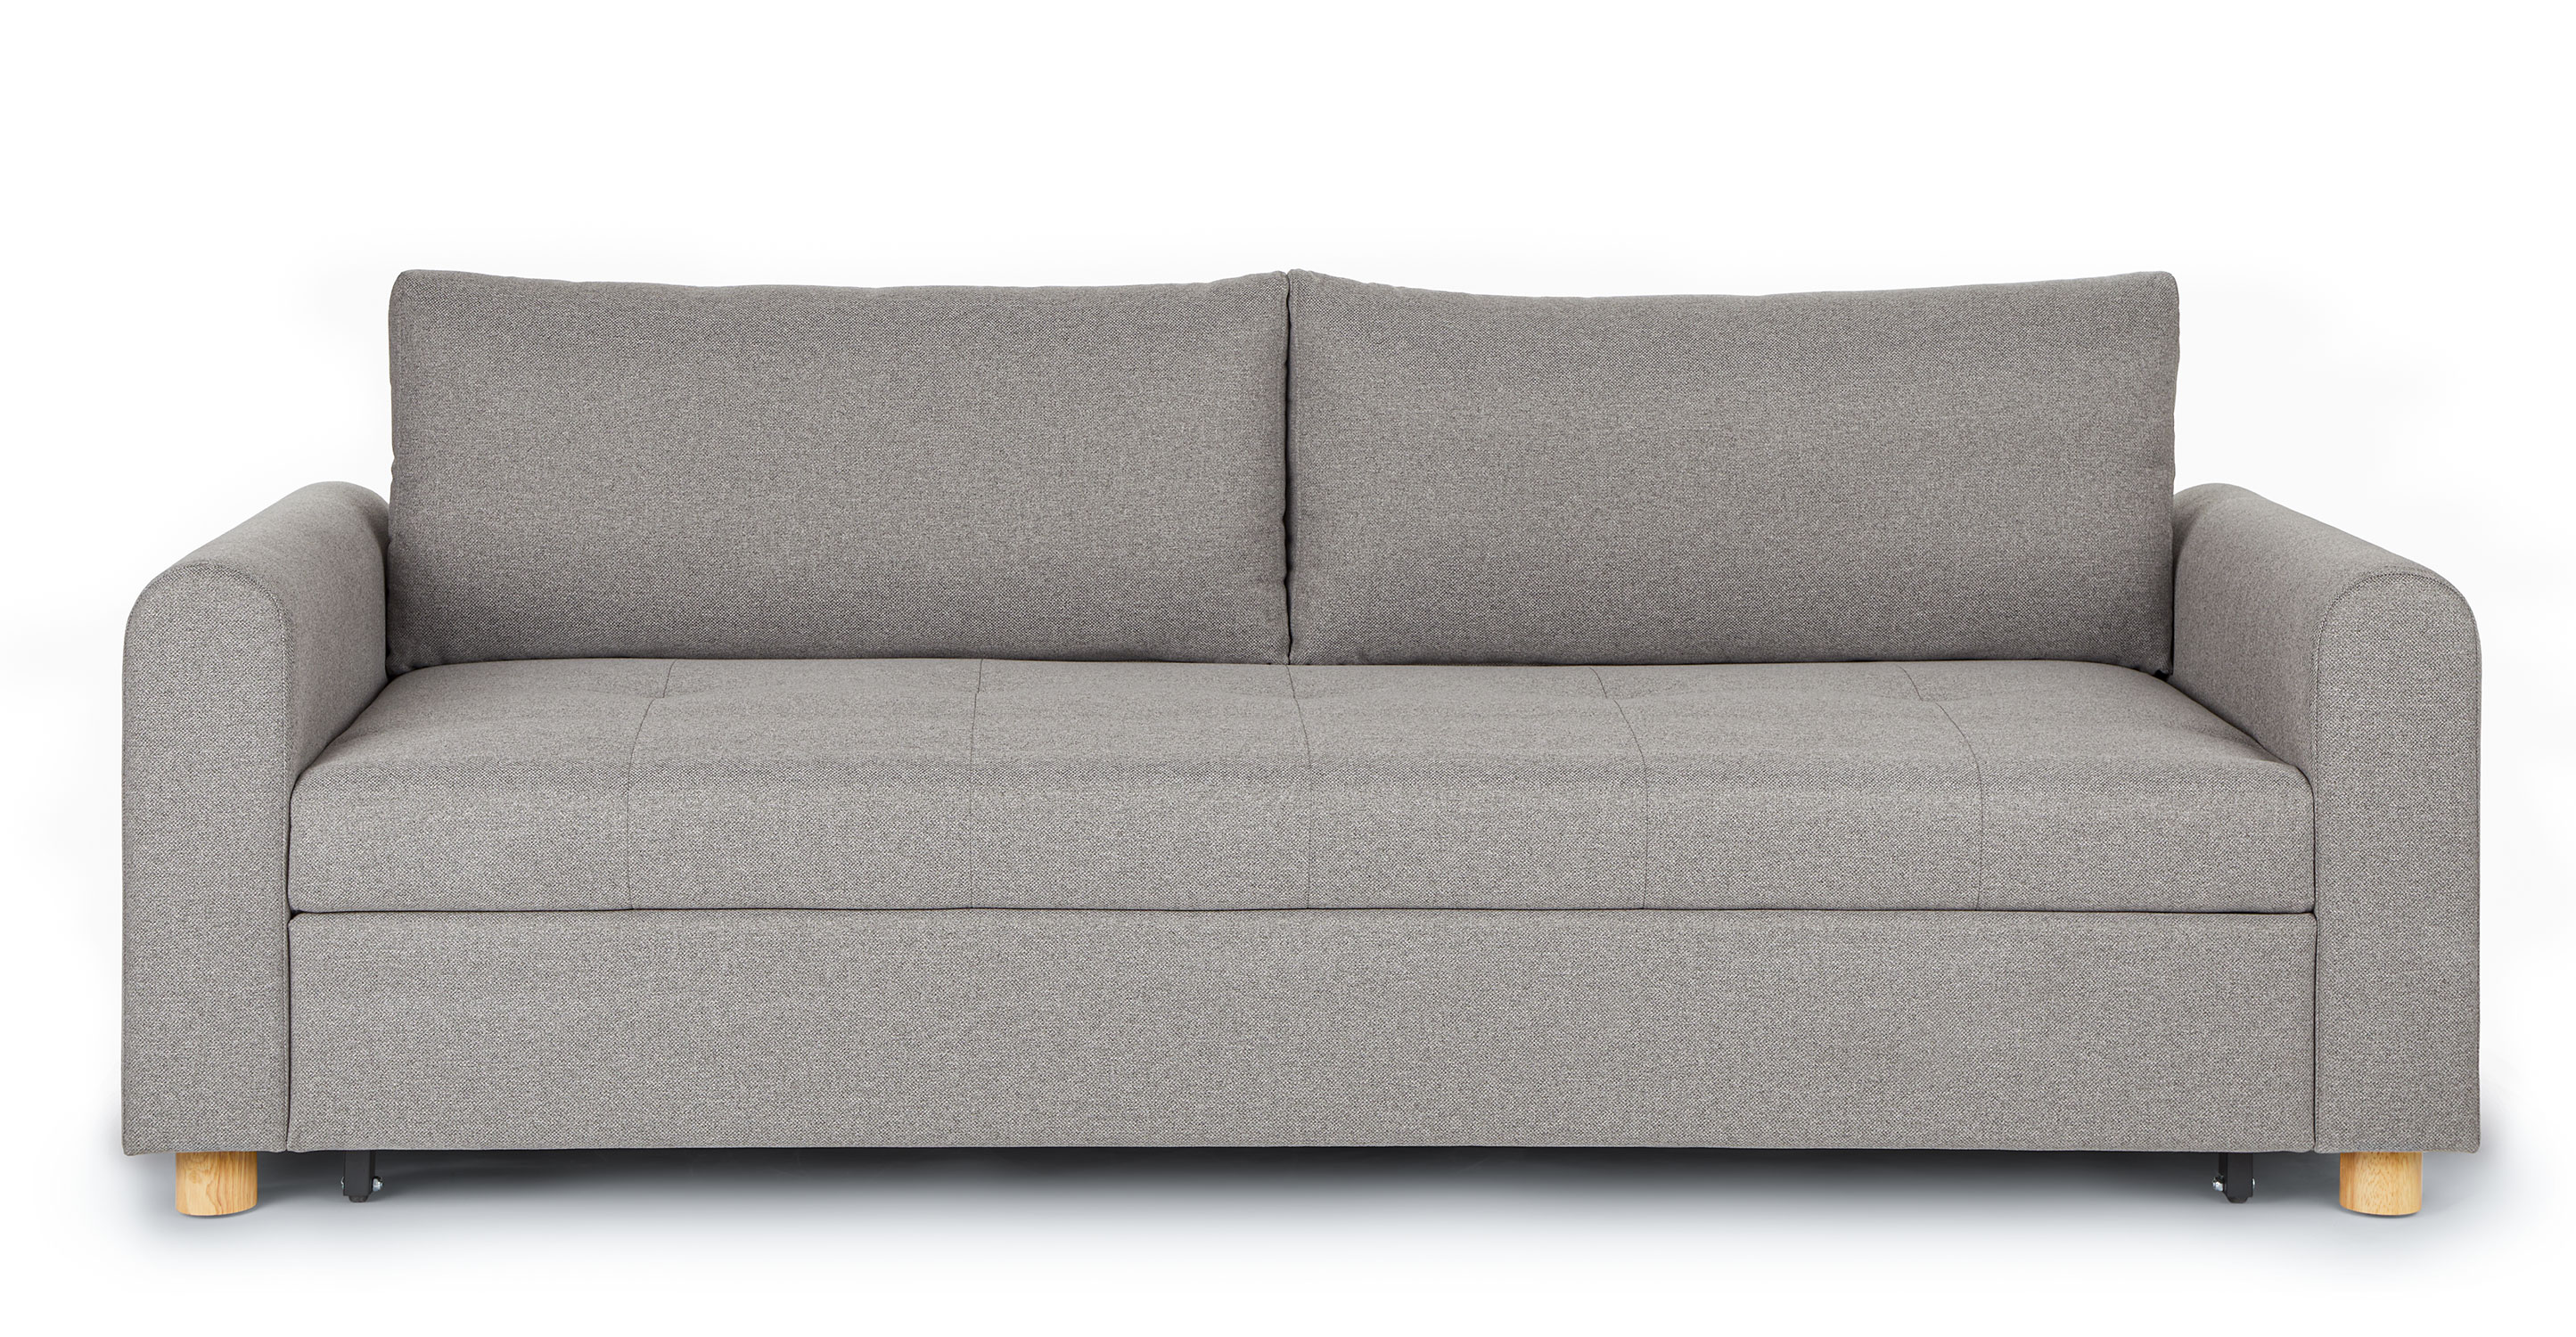 forholdet Blinke smugling Pep Gray 2-Seater Fabric Sofa Bed | Nordby | Article